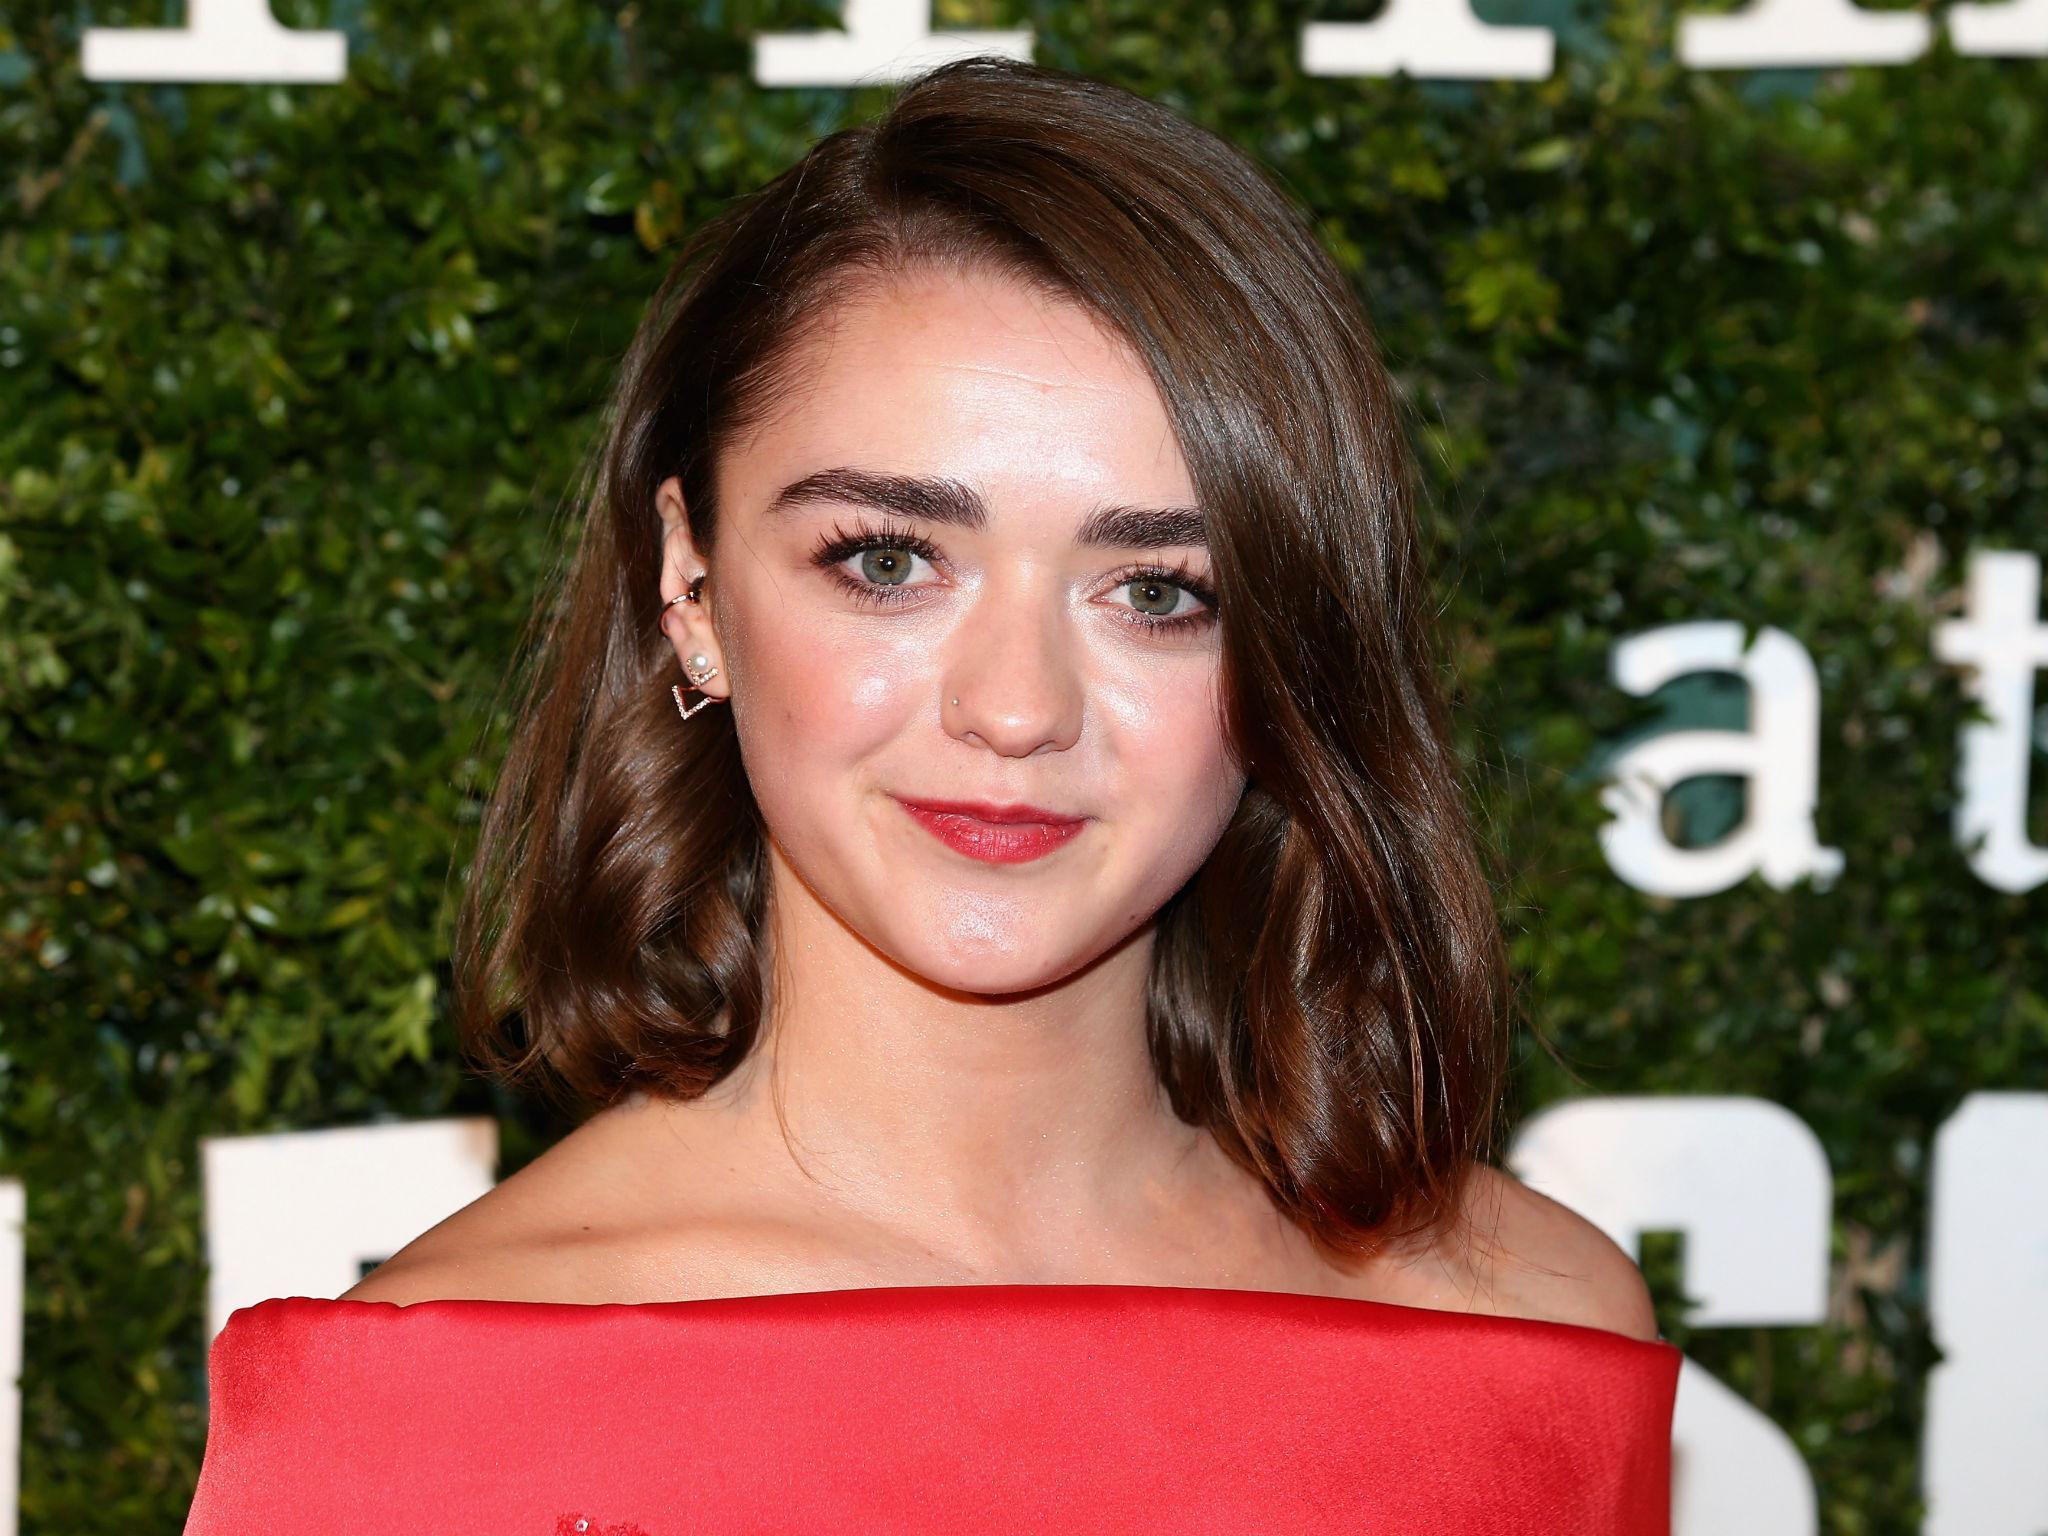 Maisie Williams says we should lose the